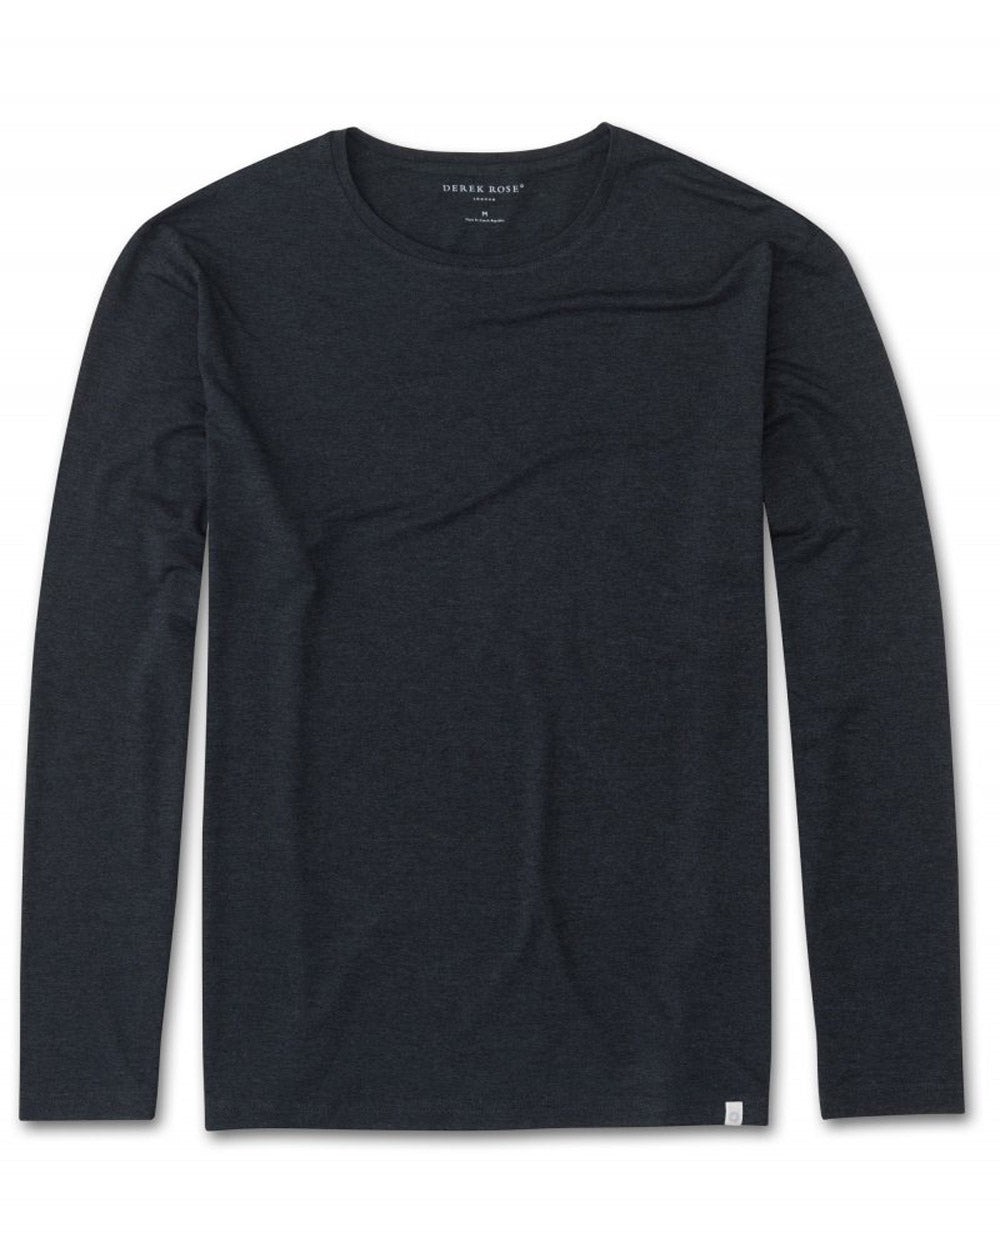 Anthracite Long Sleeve T-Shirt